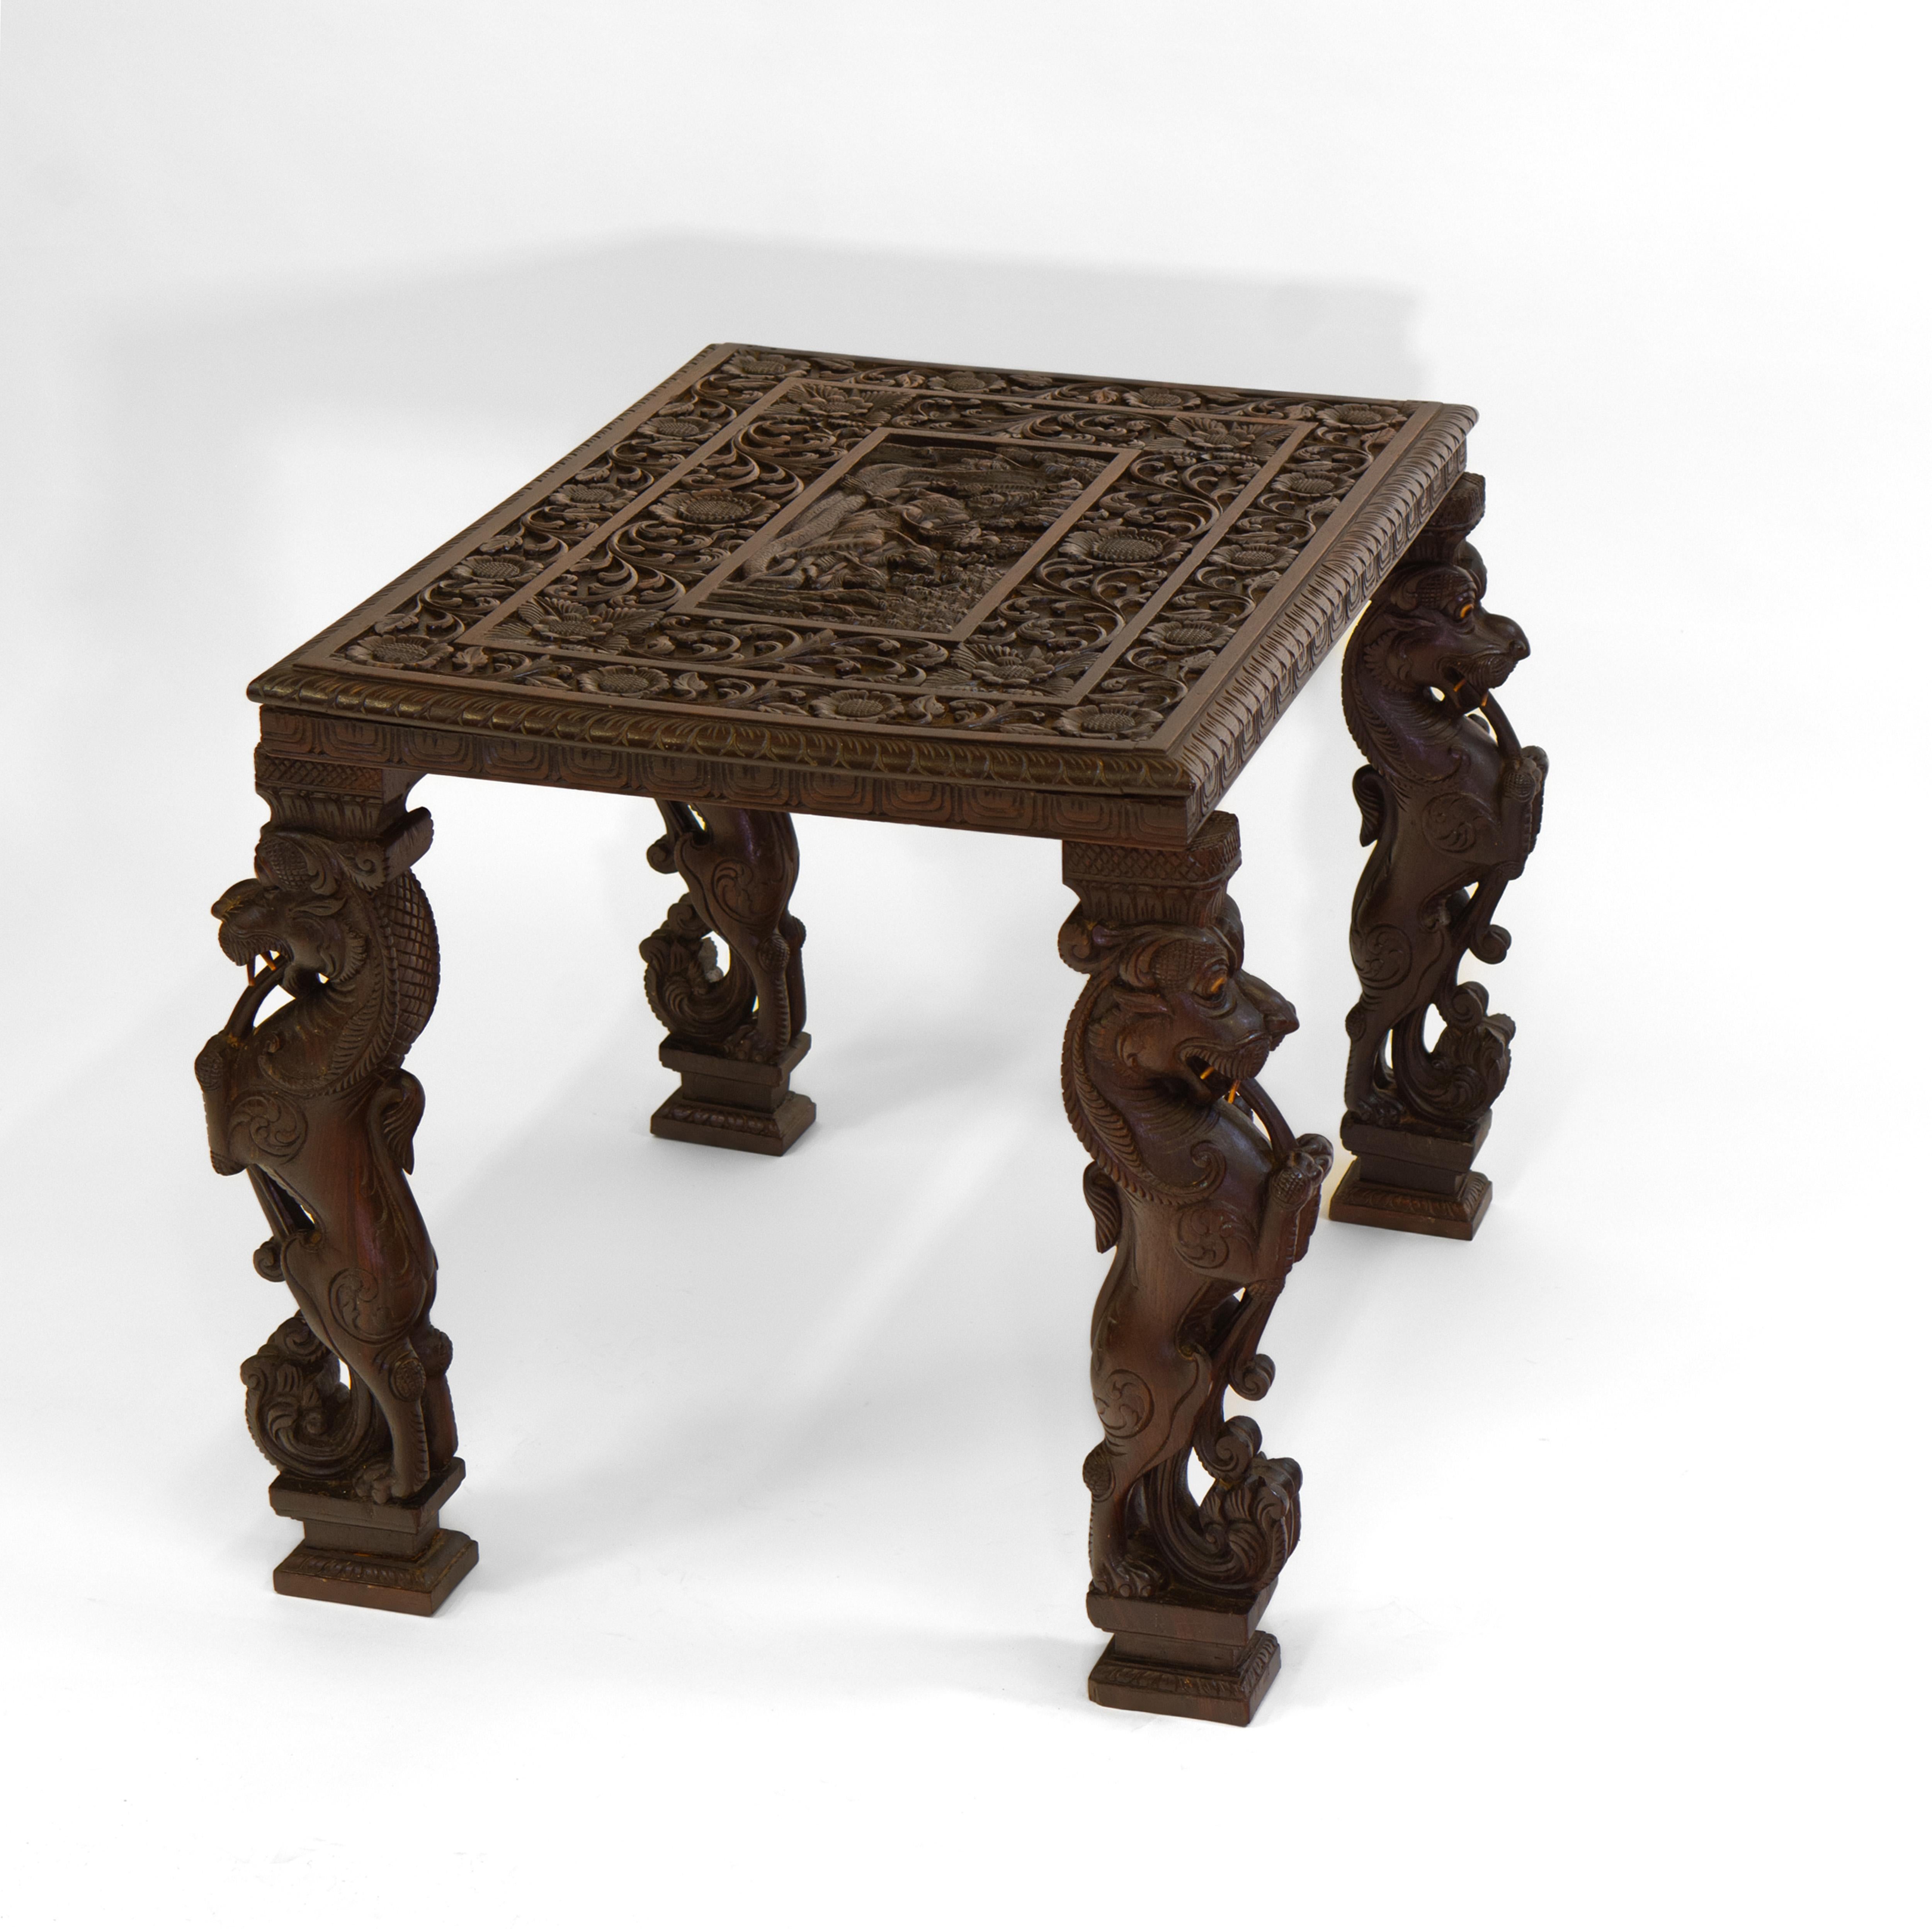 A wonderful profusely hand carved Anglo Indian occasional table with mythical lions to each leg. It boasts intricate floral decoration and carved top depicting Vishnu. Circa 1900.

Delivery included to the mainland UK via a selected parcel